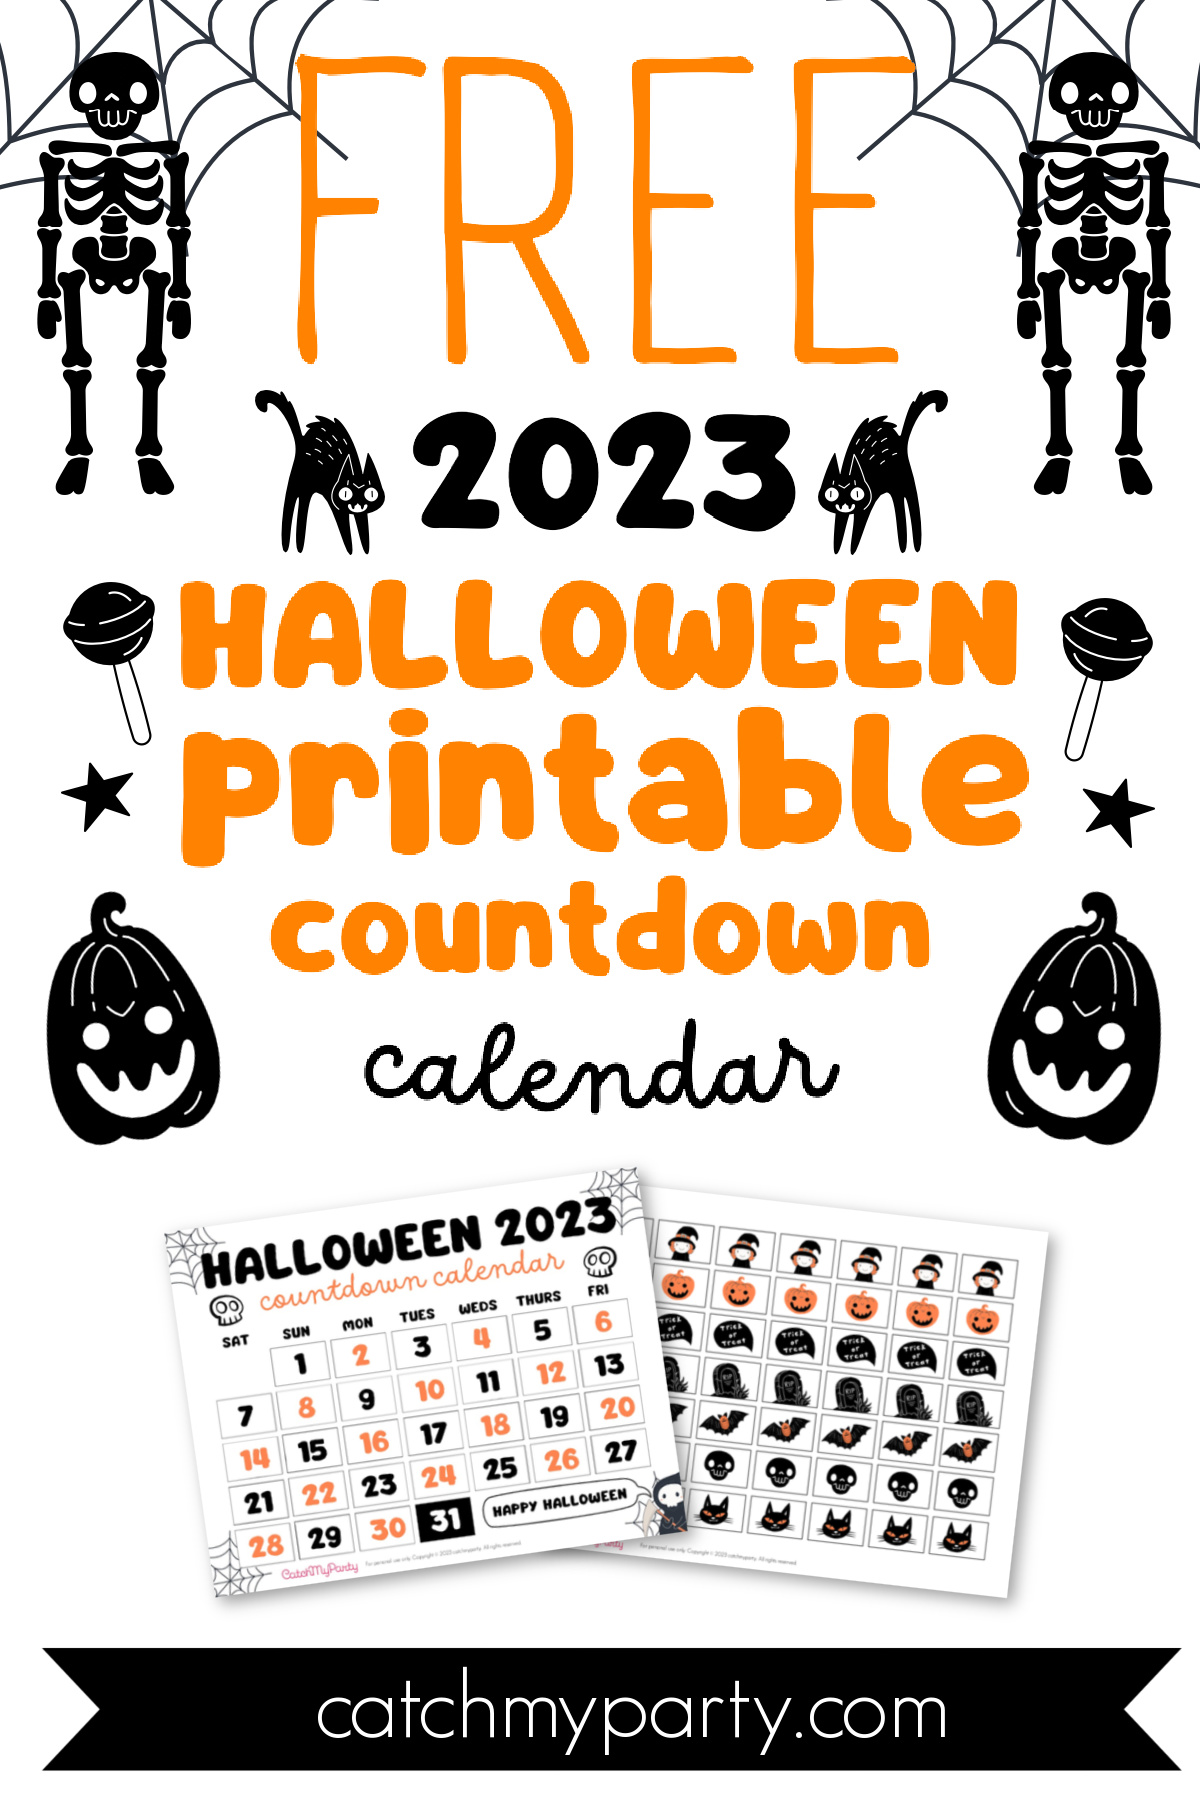 Get Your FREE Printable Halloween Countdown Calendar for 2023!